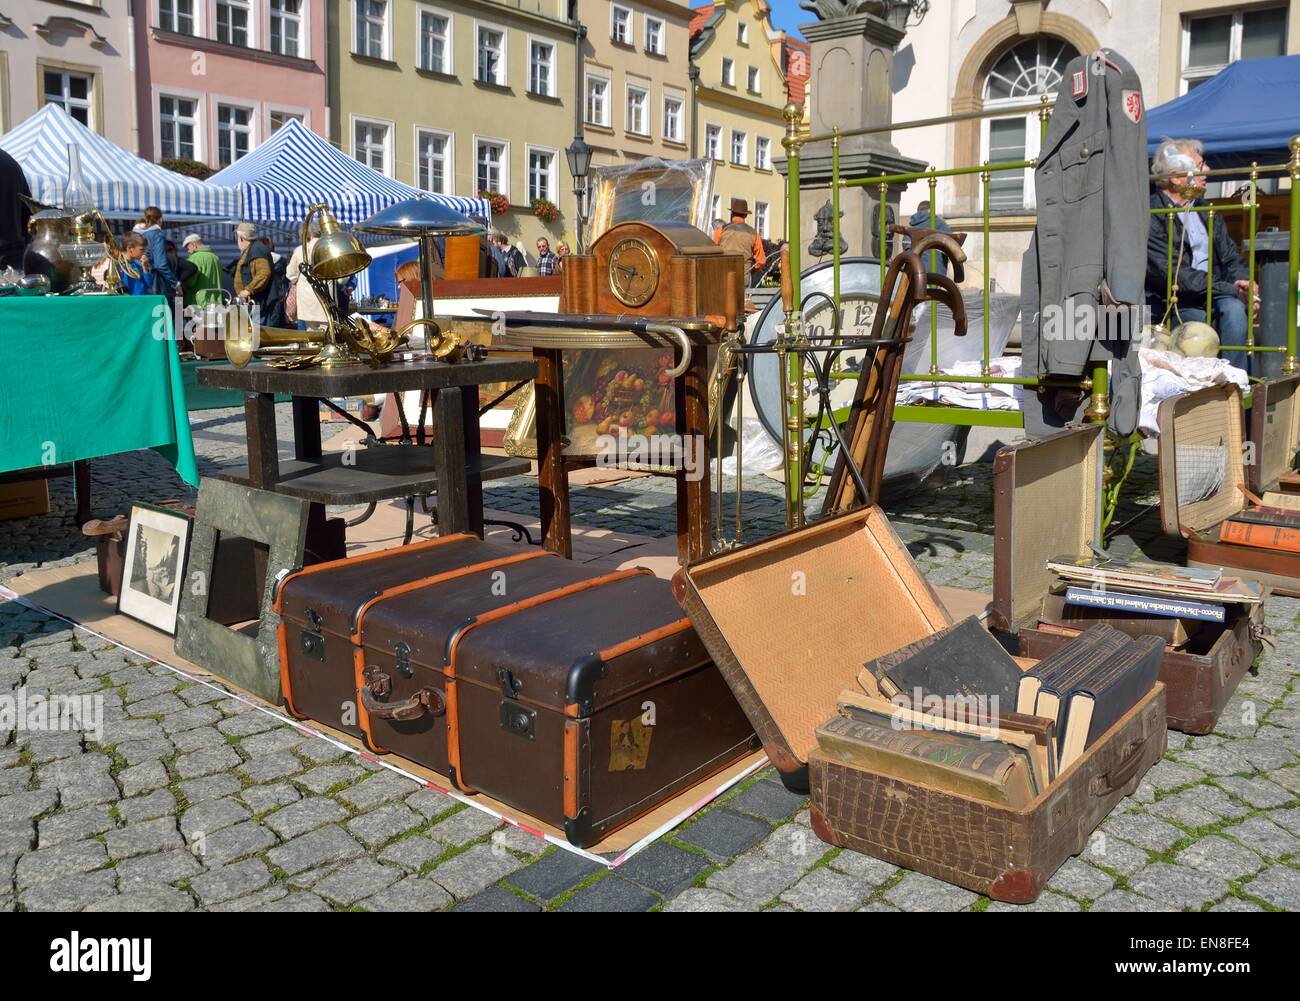 One of the largest flea market in Poland. Antiques fair held on last weekend of every year in Jelenia Gora, Poland. Stock Photo